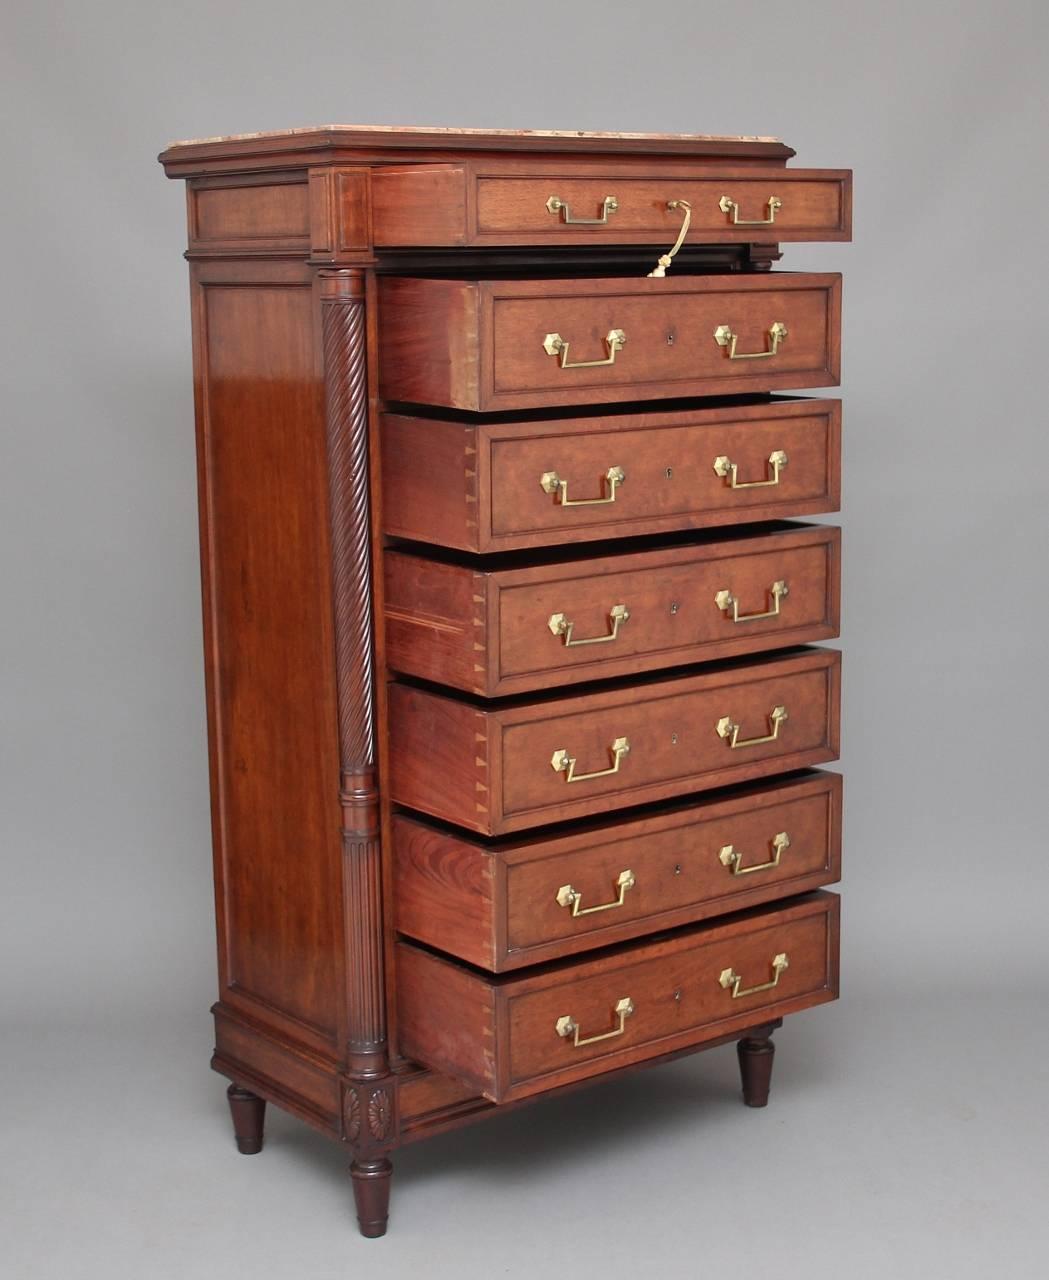 A lovely quality 19th century French mahogany semainier chest of drawers, the top having a moulded edge with a fantastic pink and veined figured marble top, with panelled and moulded ends, the chest having seven mahogany lined drawers all with